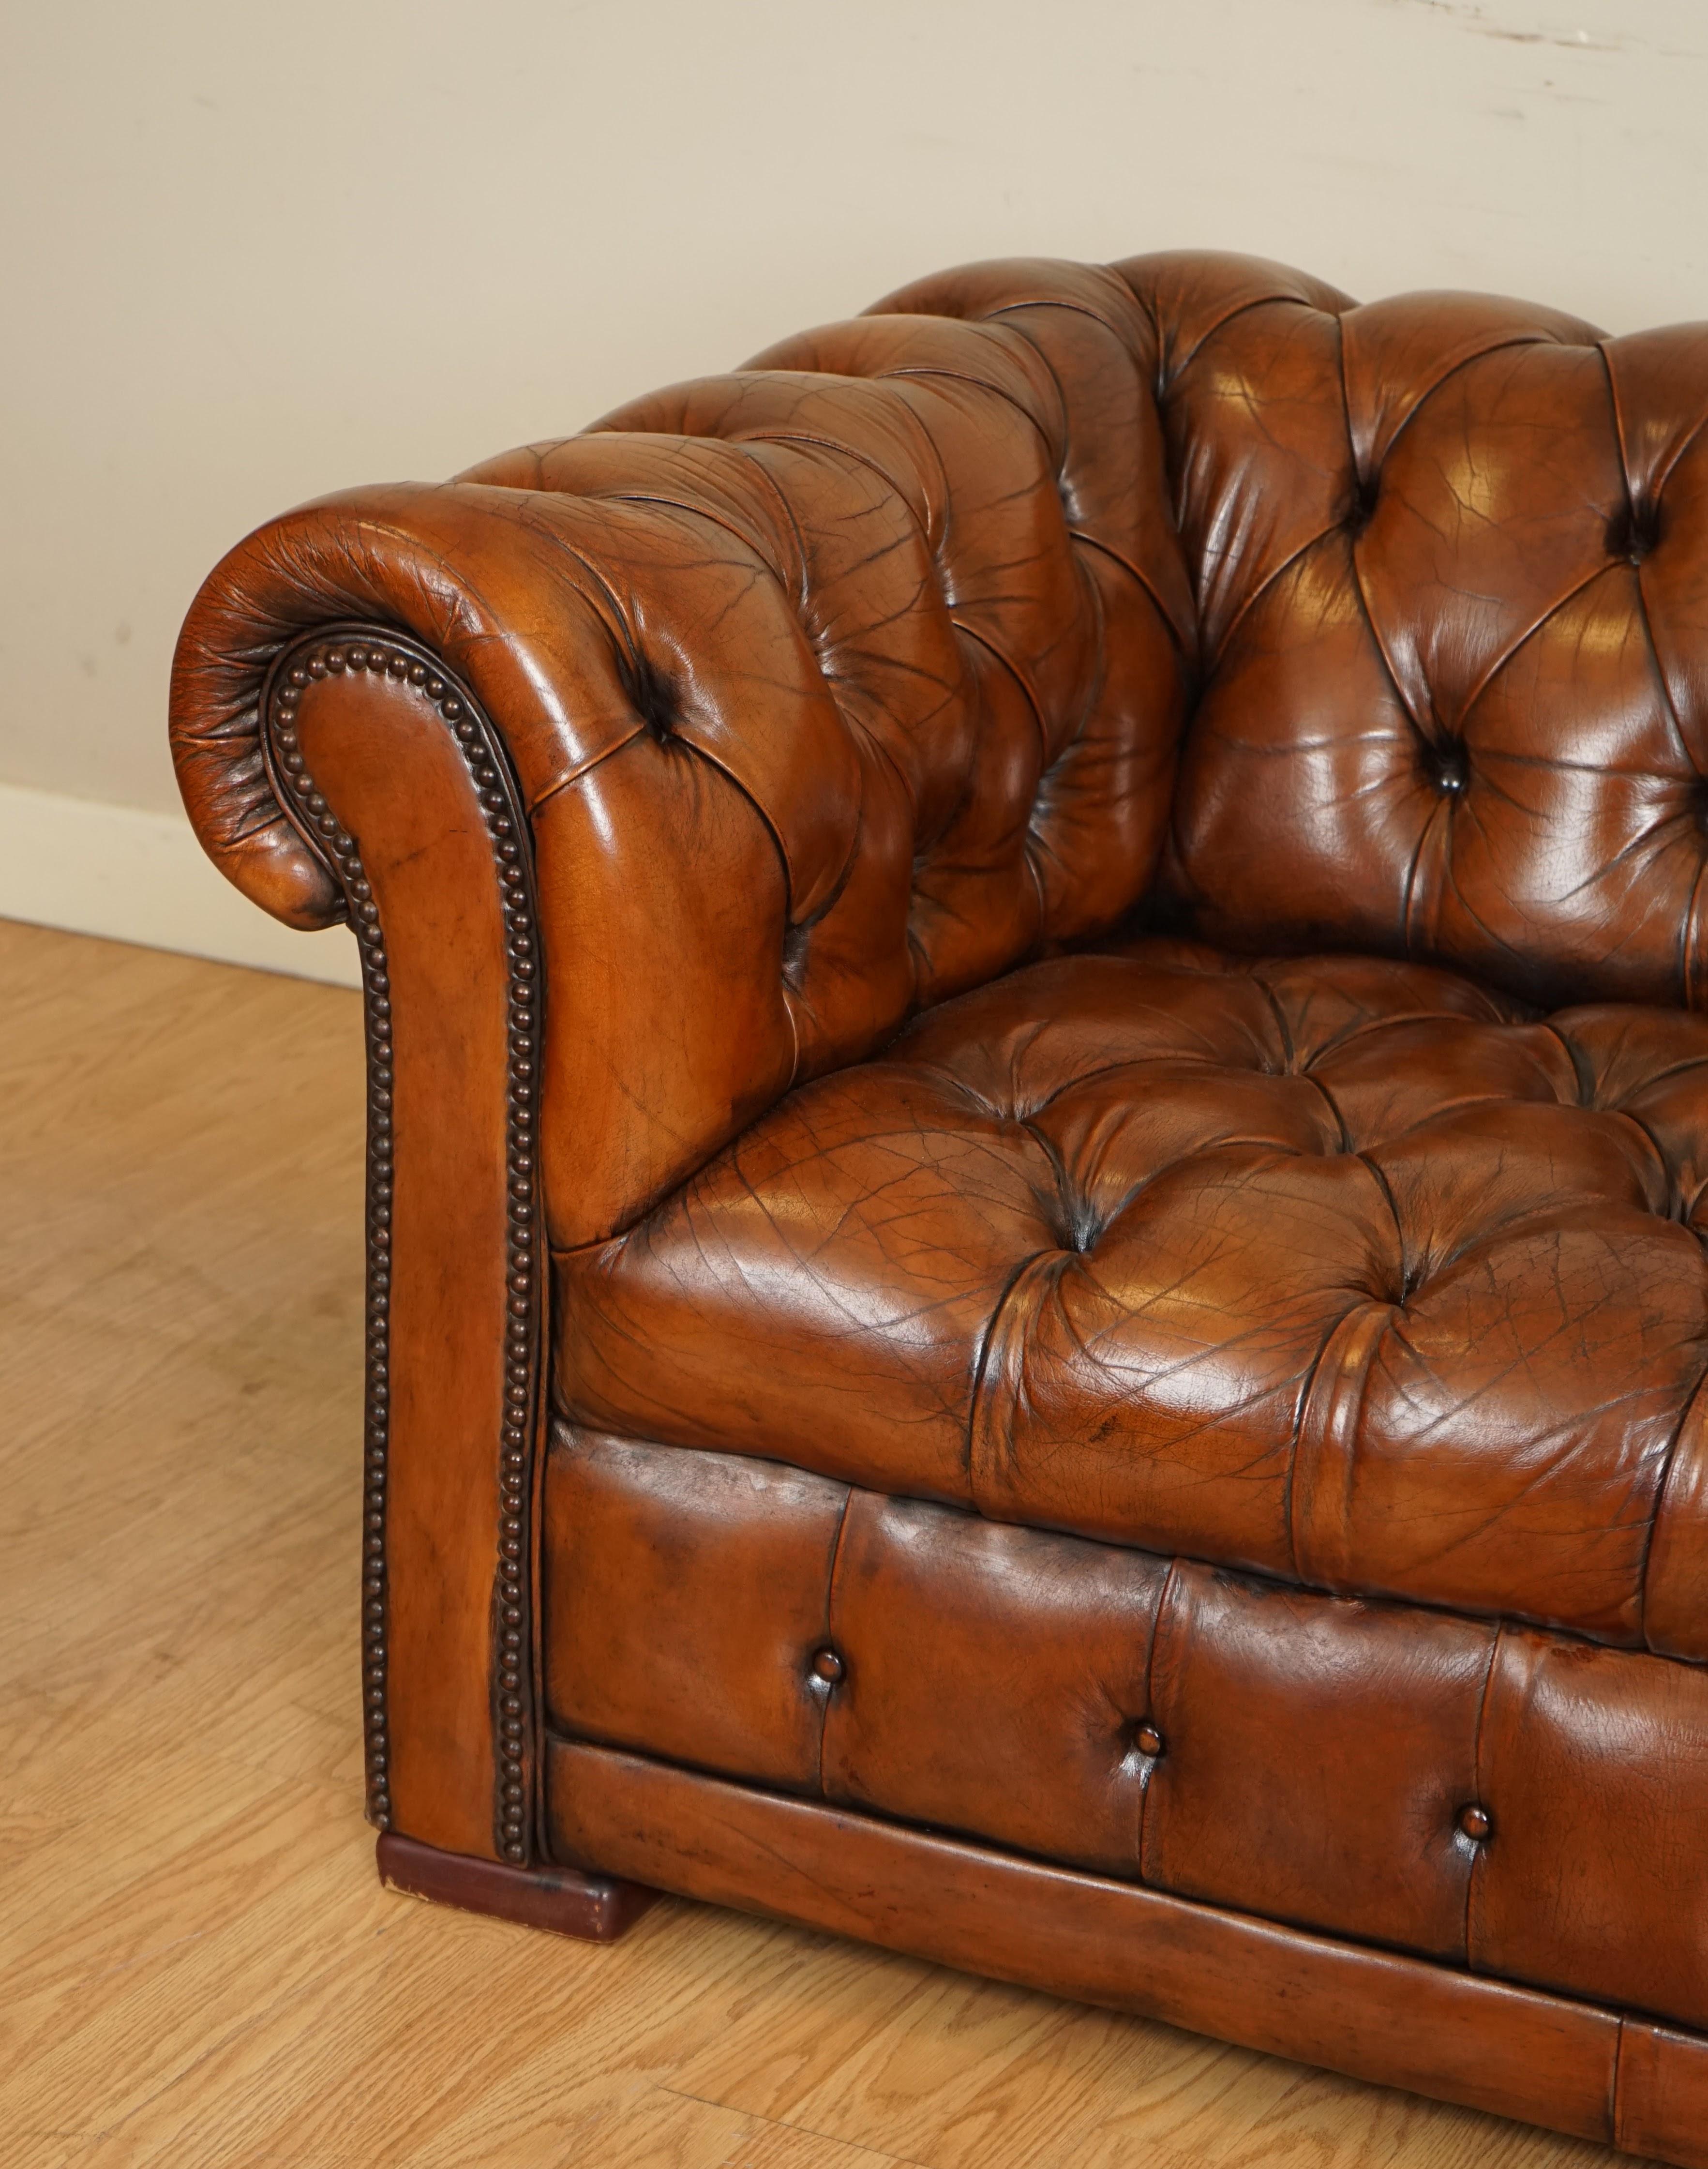 British Fully Restored Hand Dyed Whiskey Brown Chesterfield Club Gentleman's Sofa